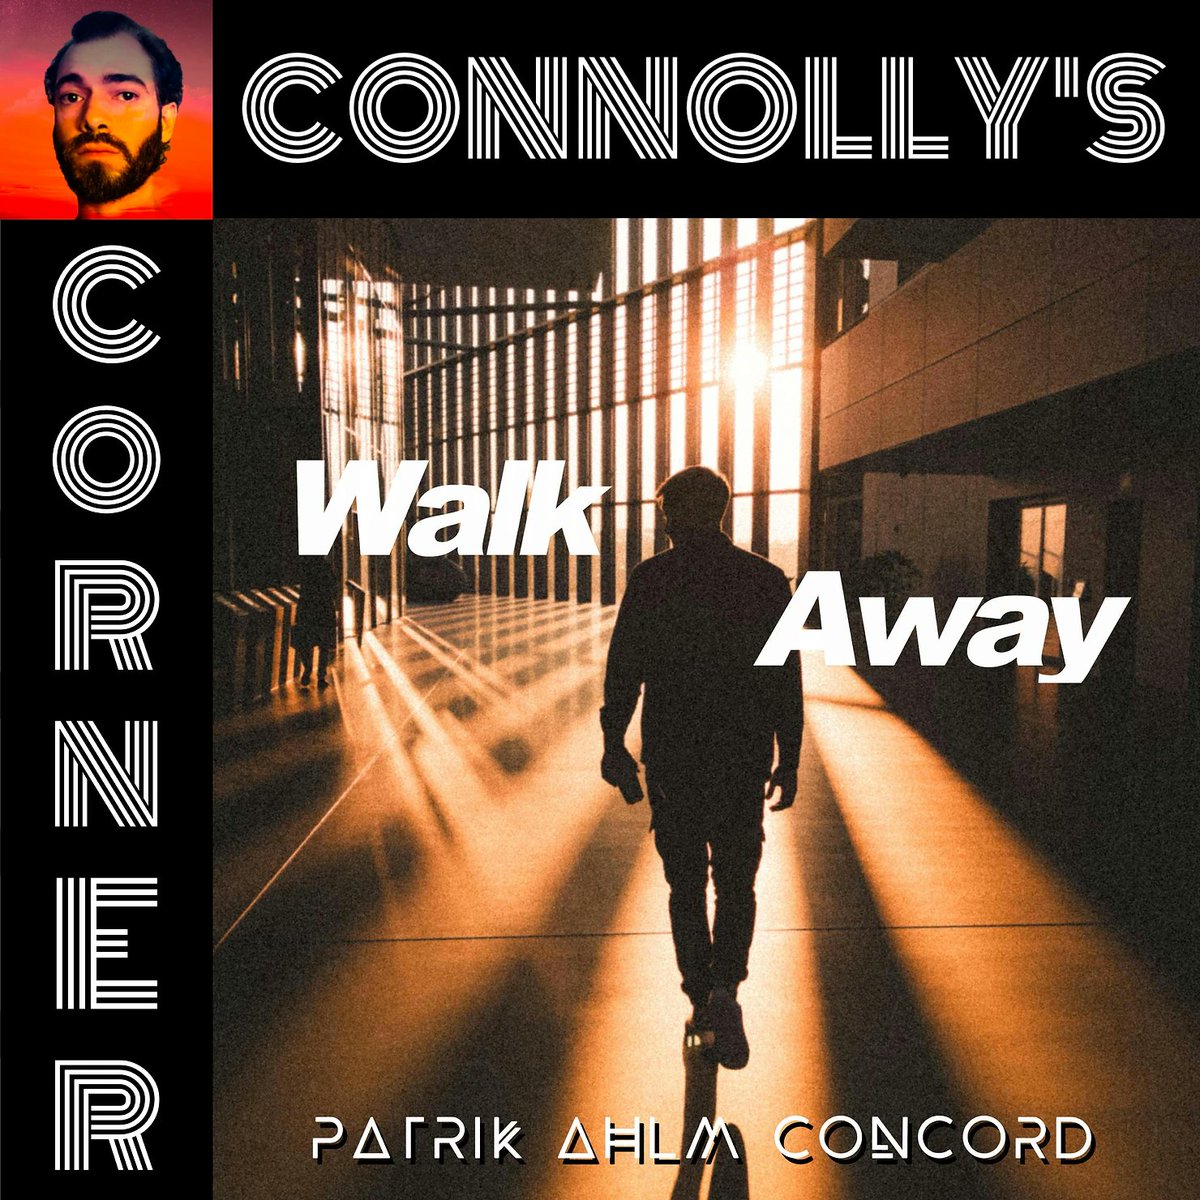 Today is Connolly's Corner day by @ConnollyTunes featuring today the wonderful @AhlmPatrik 

newartistspotlight.org/post/this-week…

#newartistspotlight #IwantmyNAS  #StopPayola  #Review  #song #SongReview